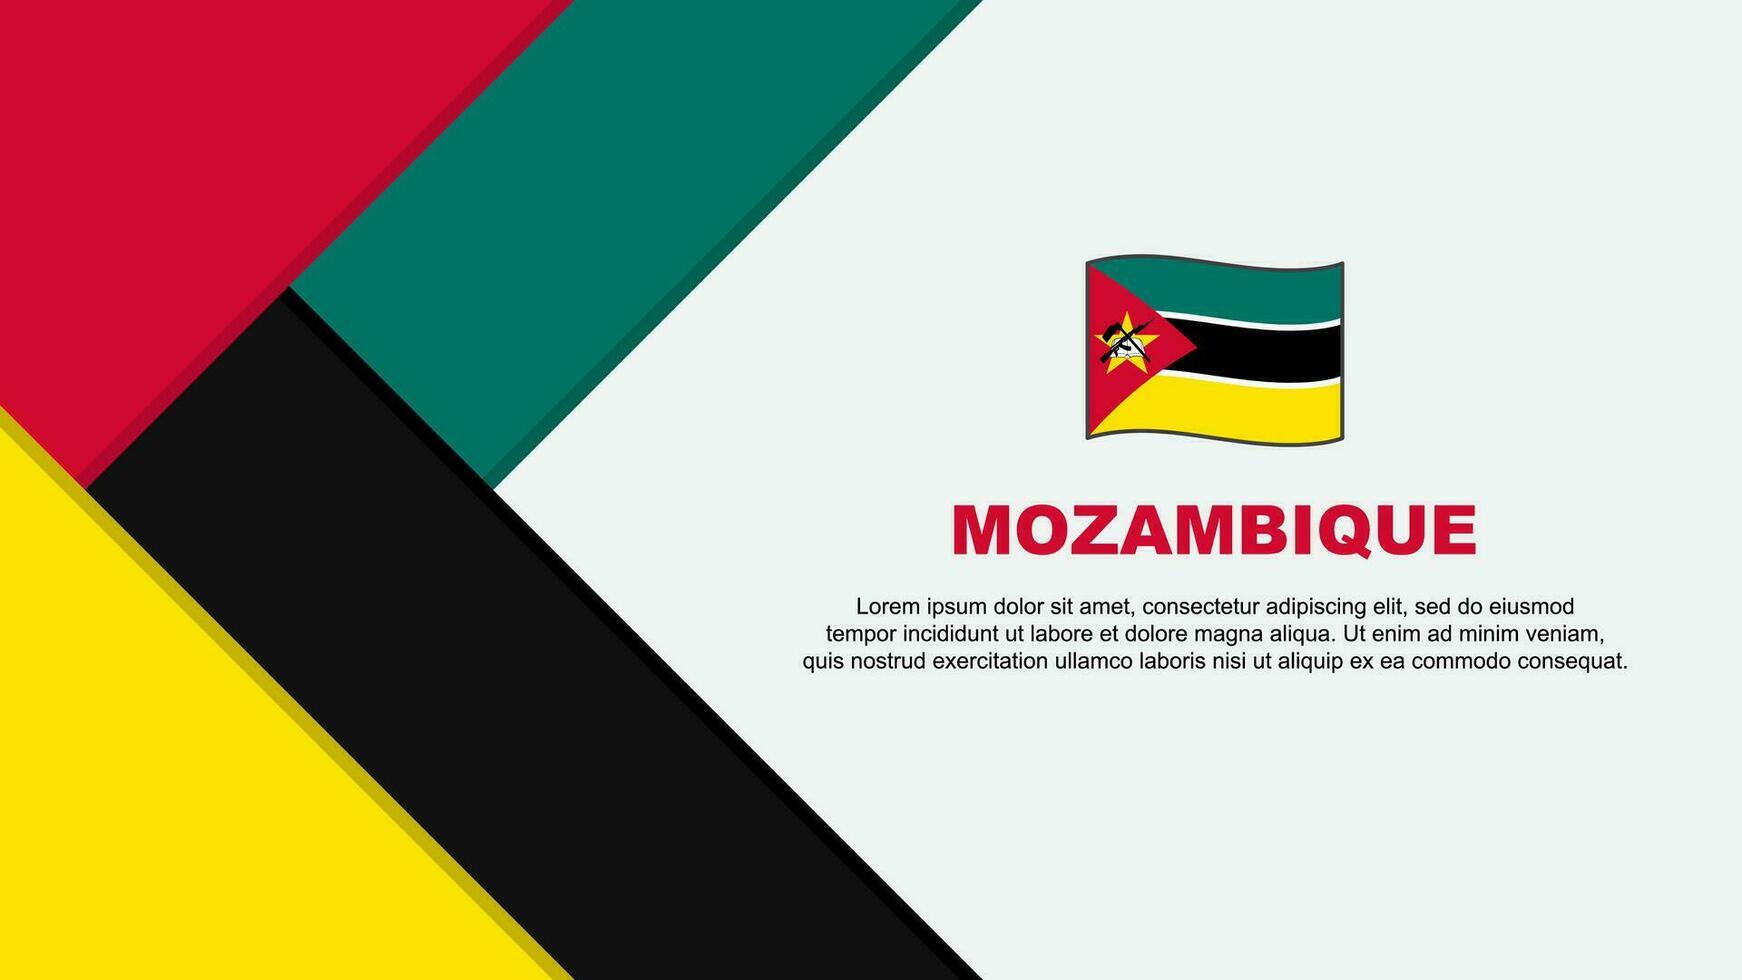 Mozambique Flag Abstract Background Design Template. Mozambique Independence Day Banner Cartoon Vector Illustration. Mozambique Illustration